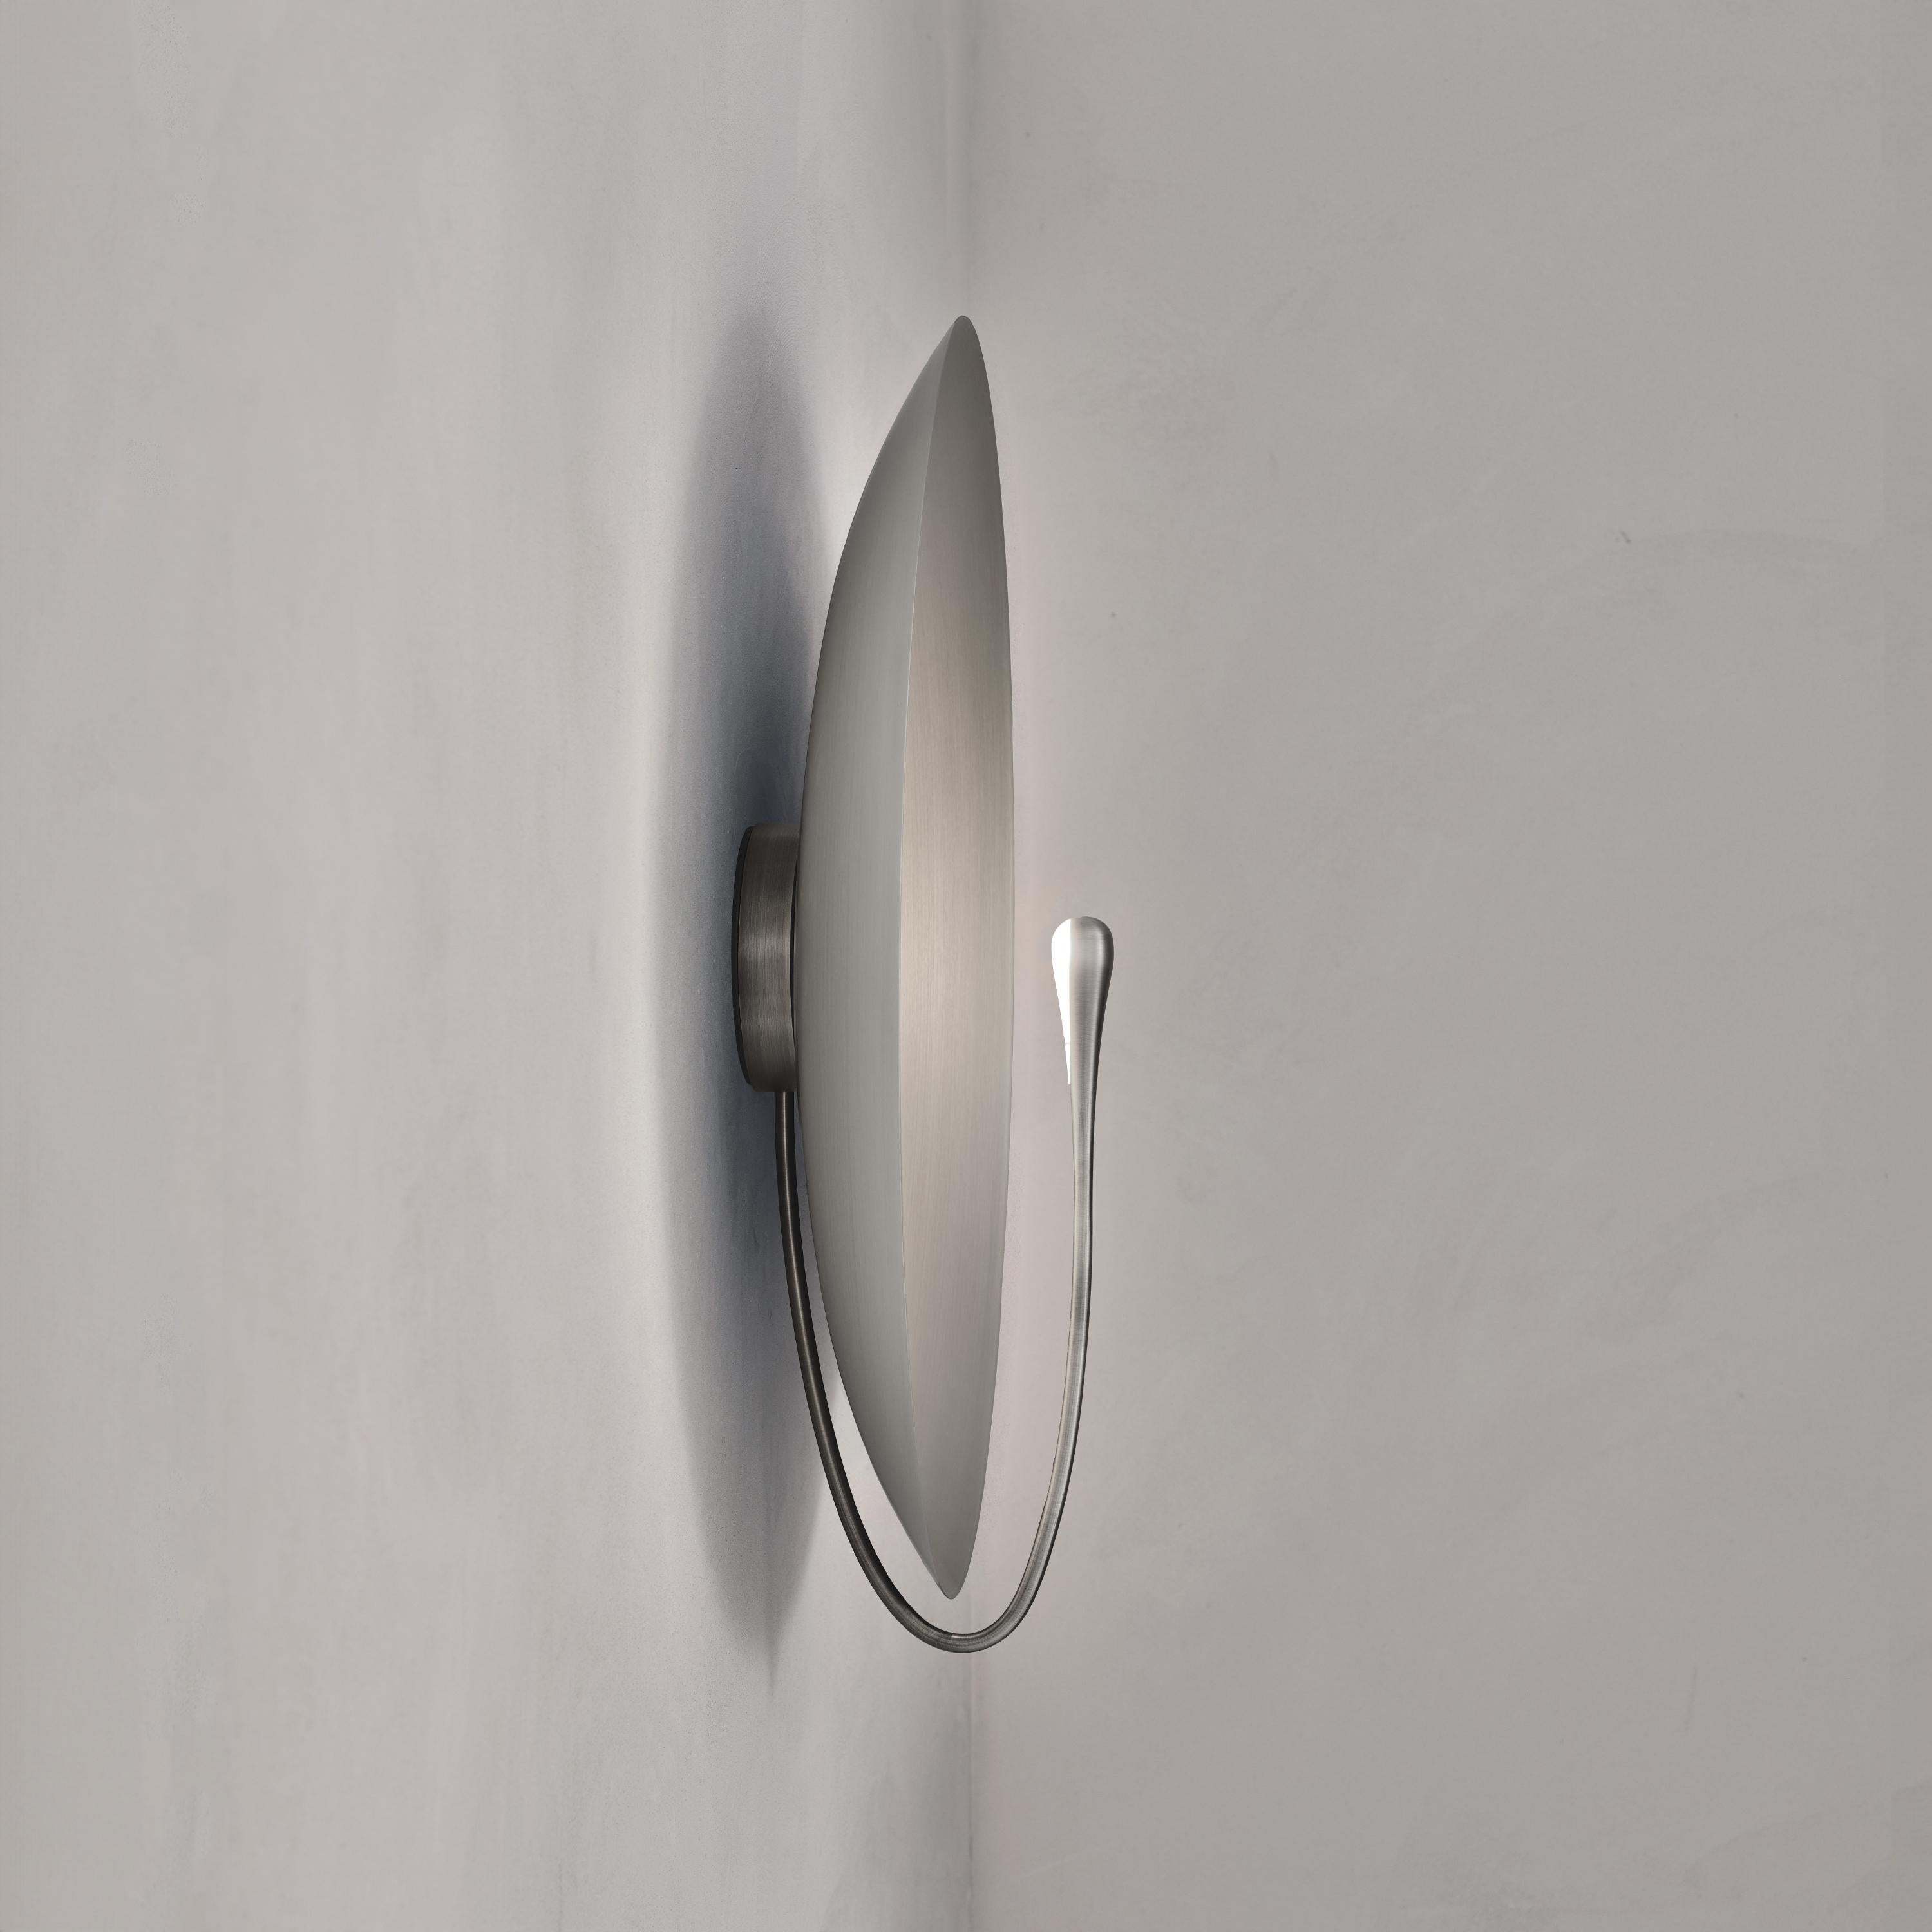 'Cosmic Seleno XL' Handmade Brushed Steel Contemporary Wall Light Sconce In New Condition For Sale In London, GB